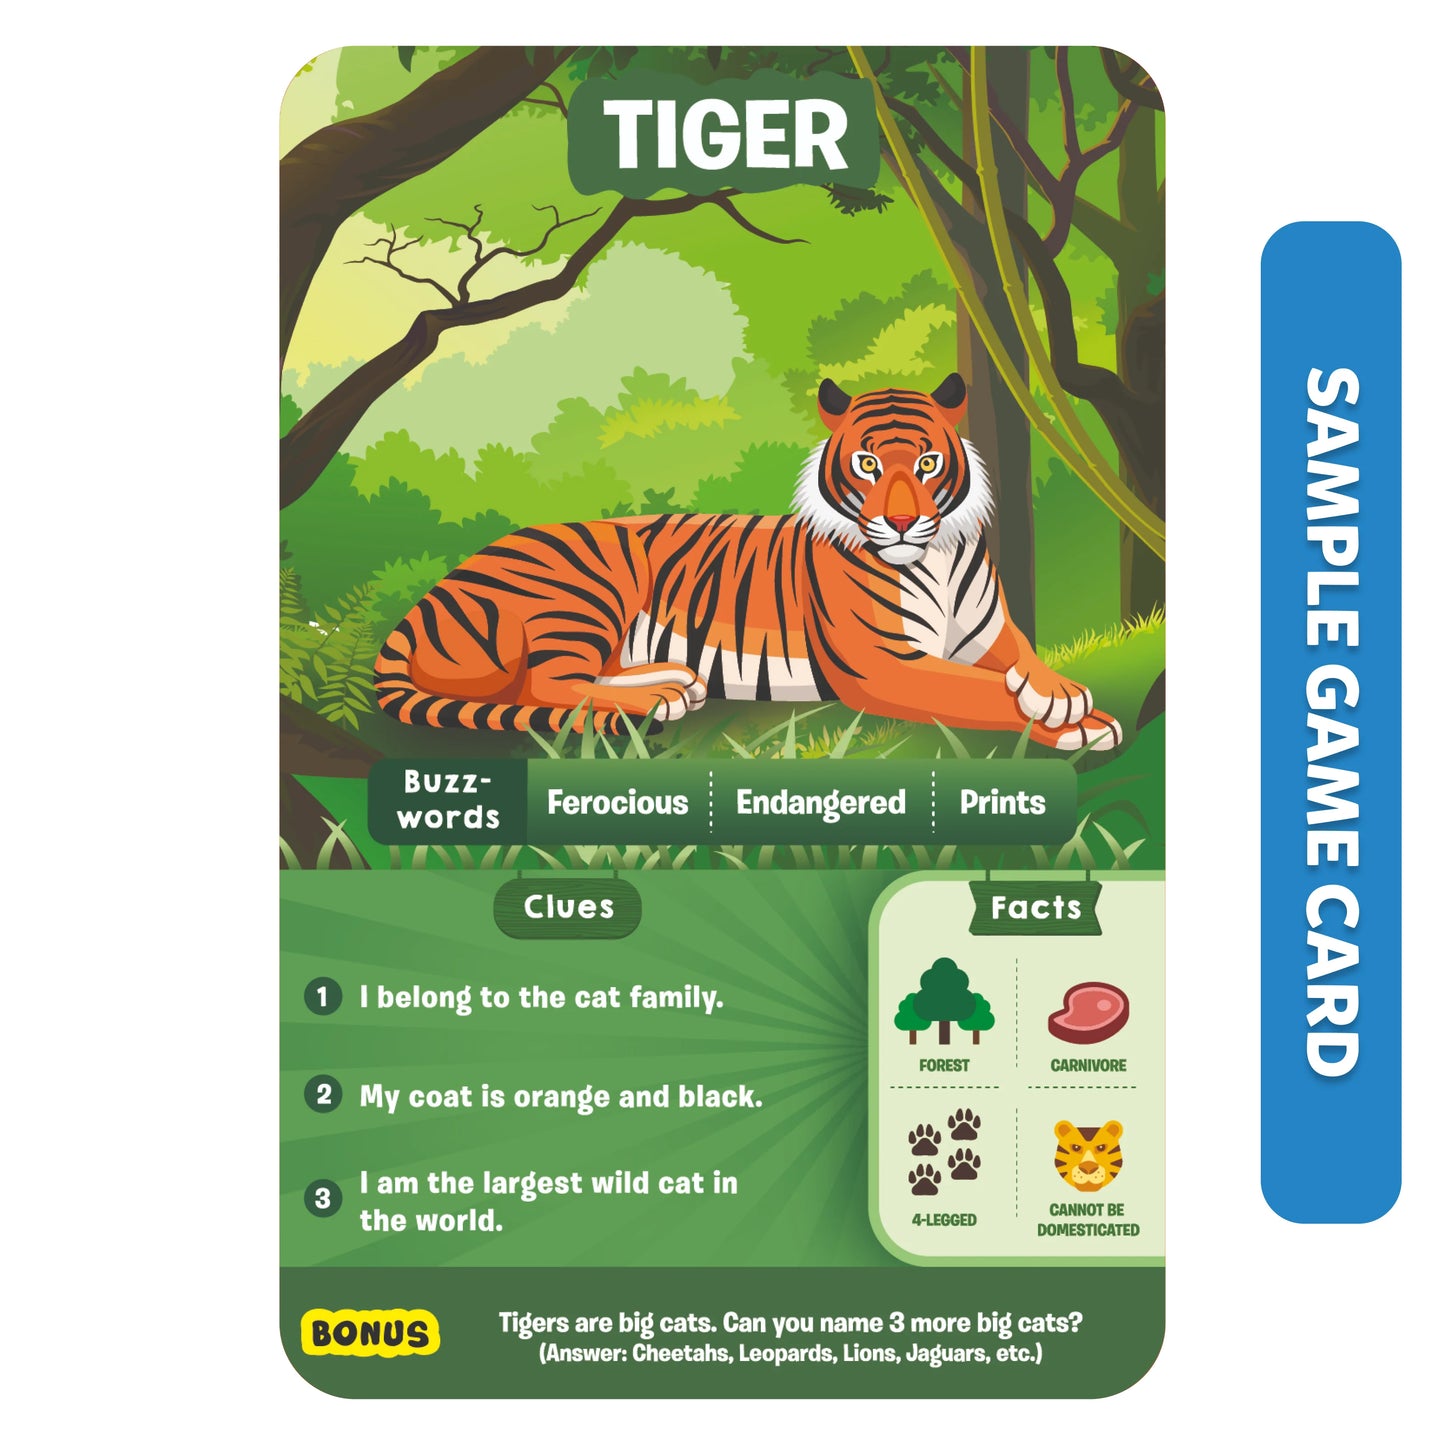 Guess in 10: Animal Planet Mega Pack | Trivia card game (ages 6+)